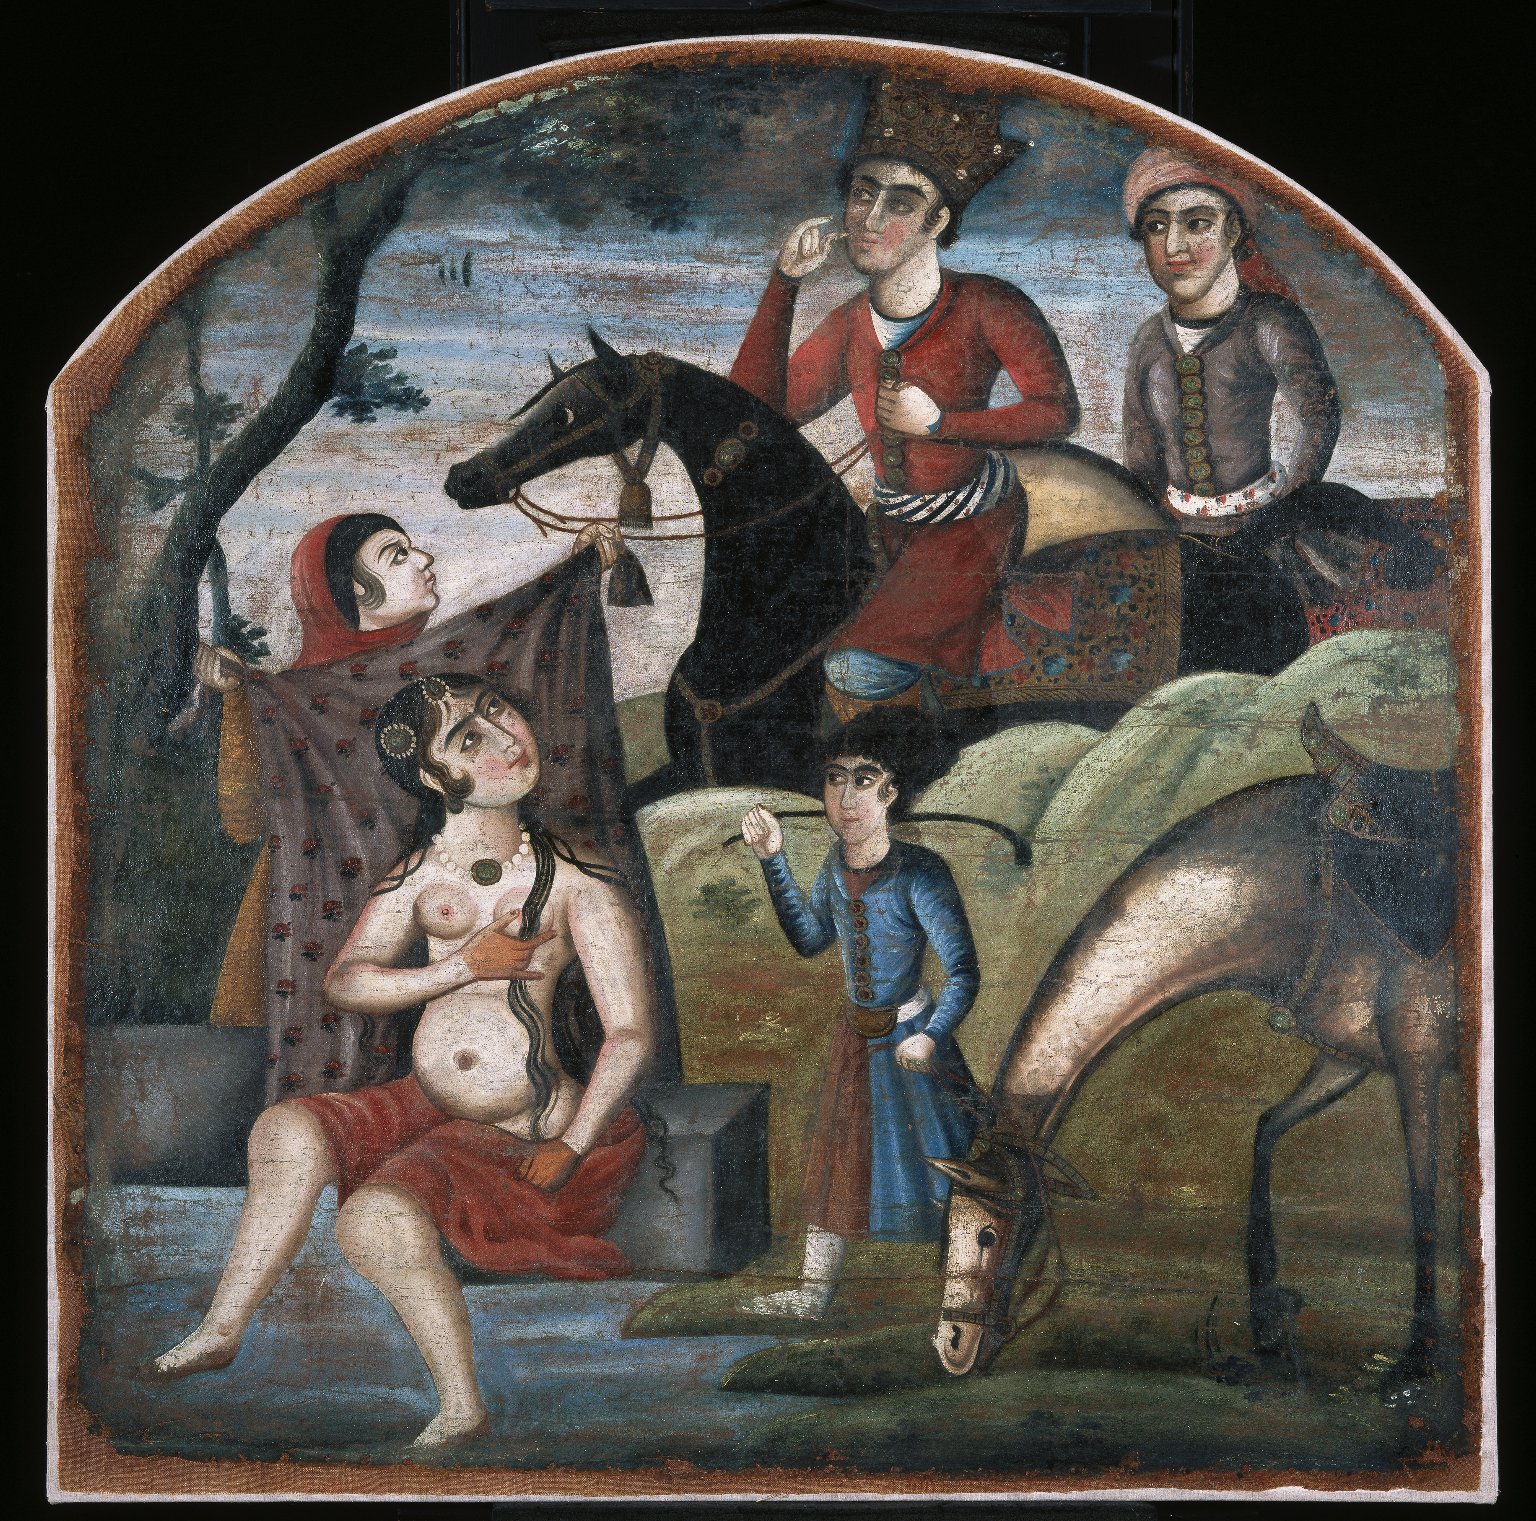 Khusraw_Discovers_Shirin_Bathing,_From_Pictorial_Cycle_of_Eight_Poetic_Subjects,_mid_18th_century.jpg